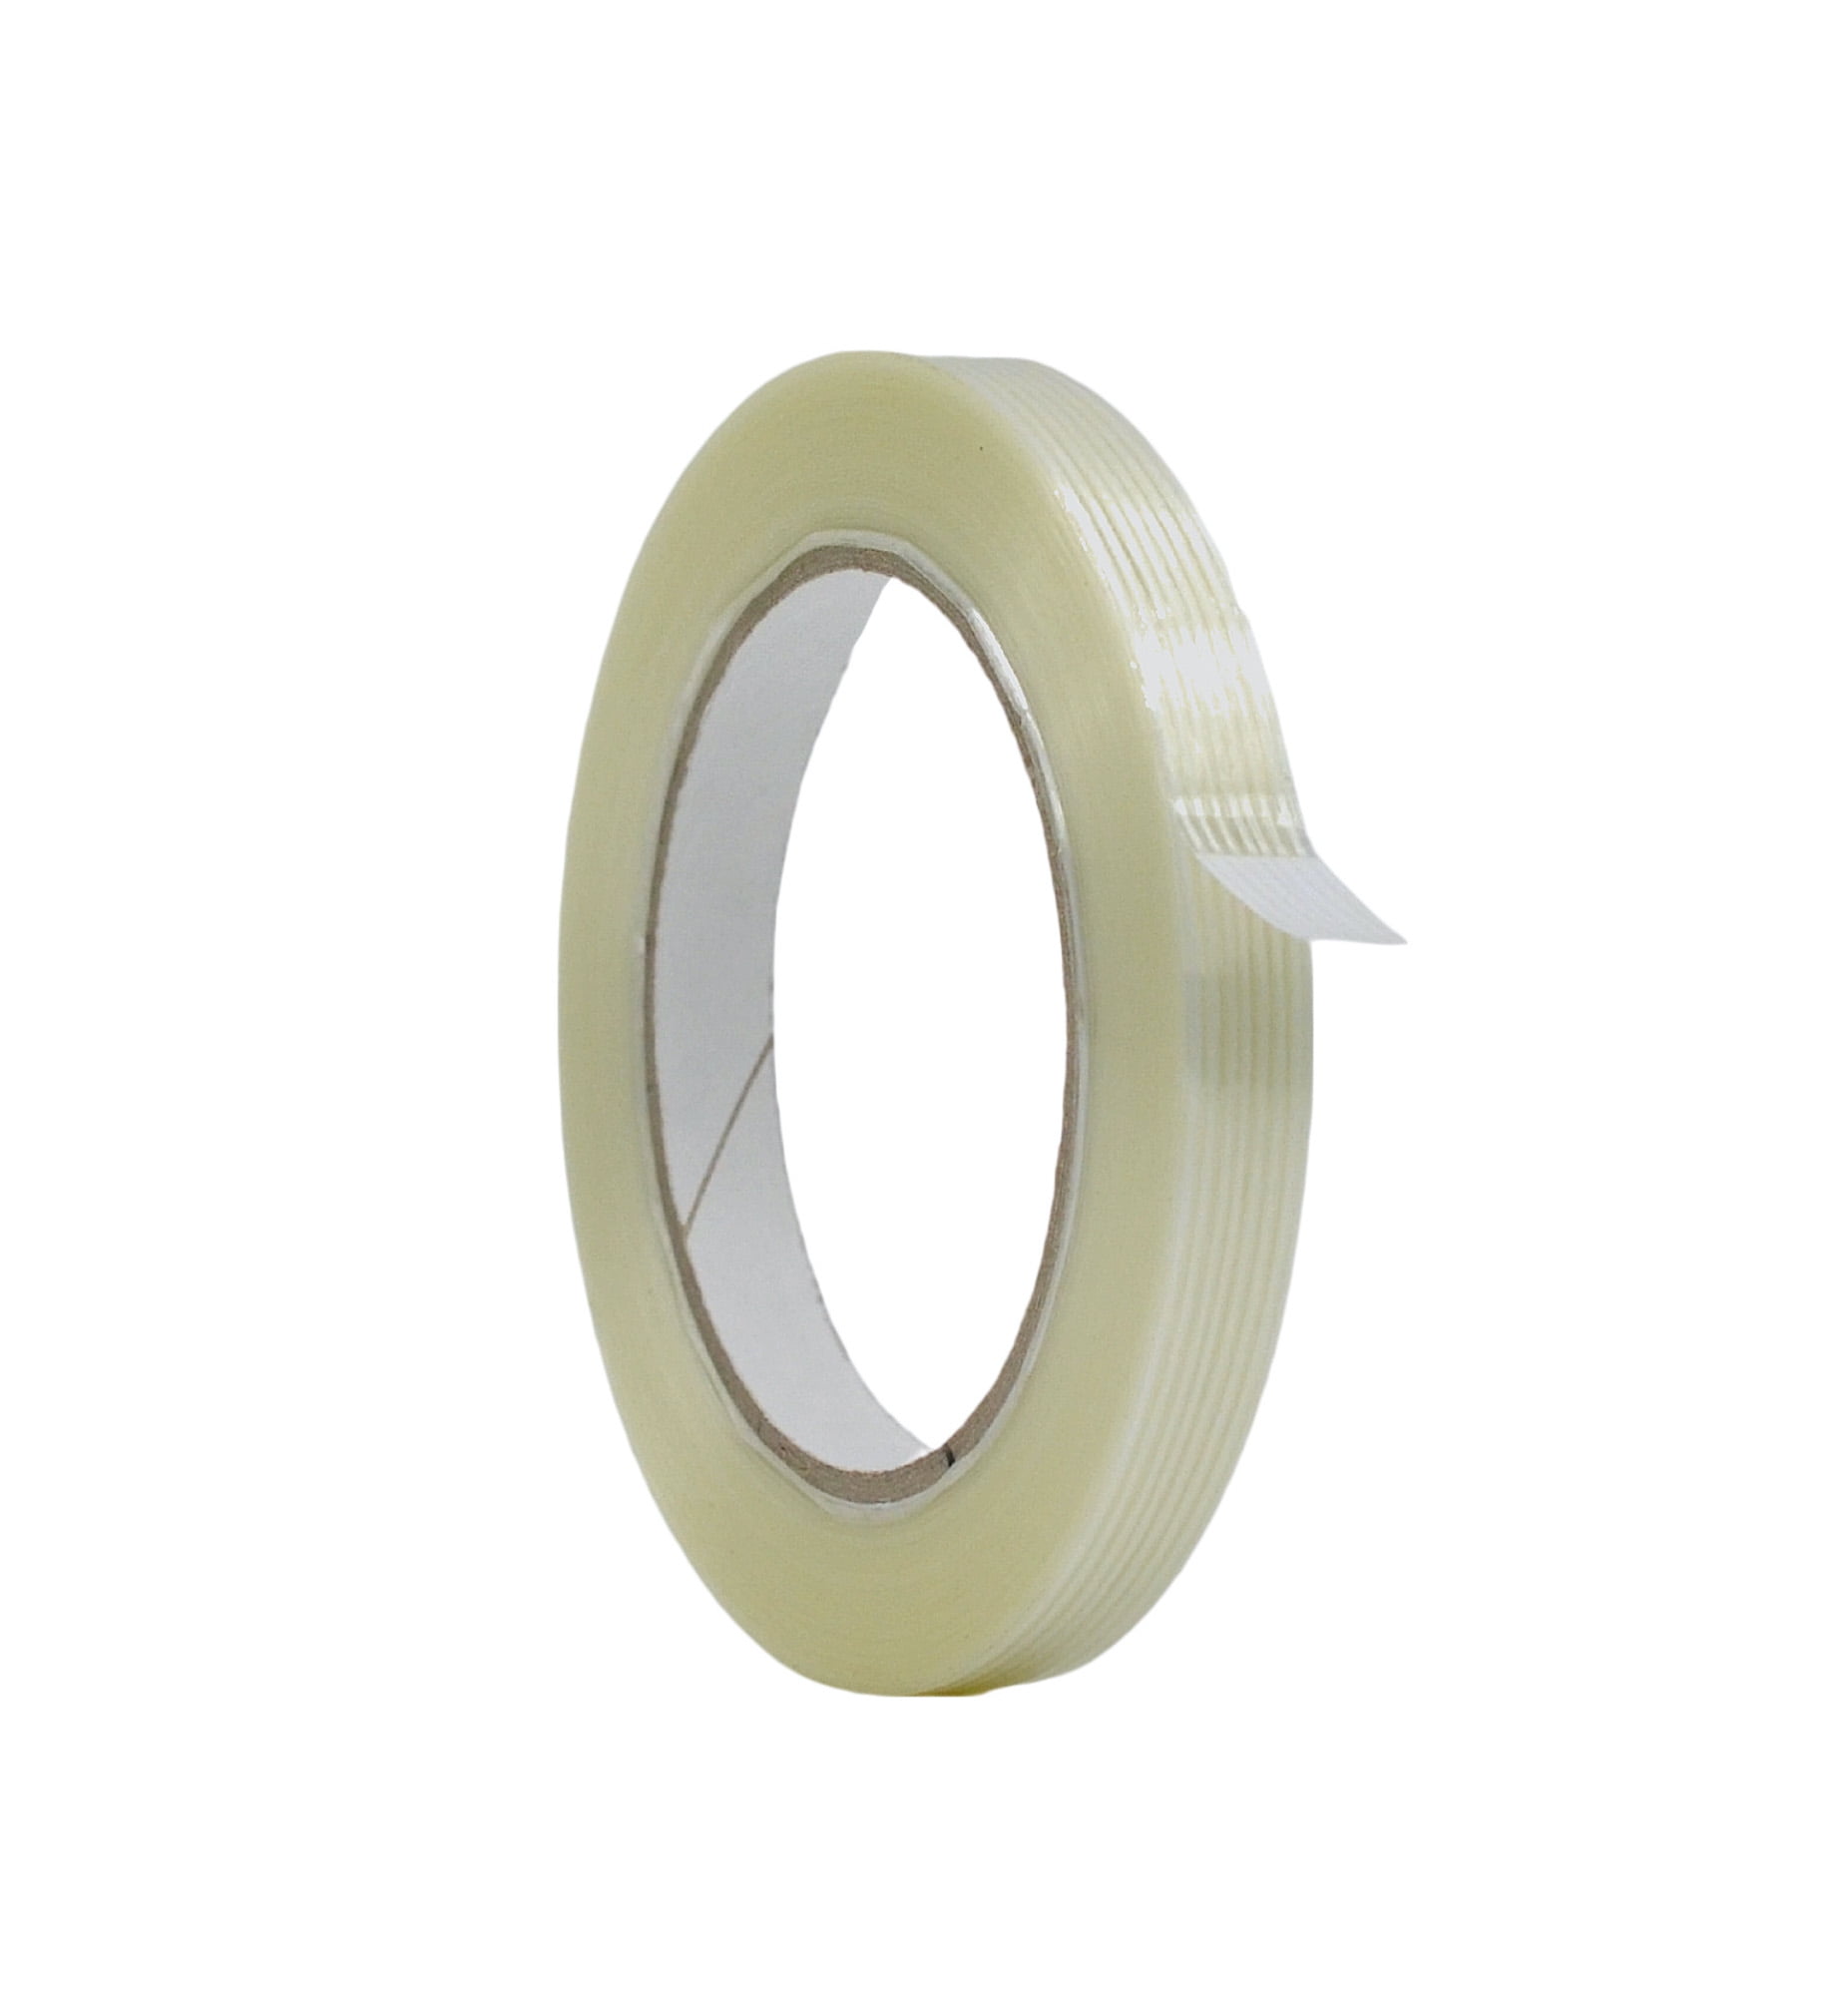 Pack of 24 Filaments Run Lengthwise Wide x 60 yds. 2 in MAT Commodity Grade Fiberglass Reinforced Filament Strapping Tape 